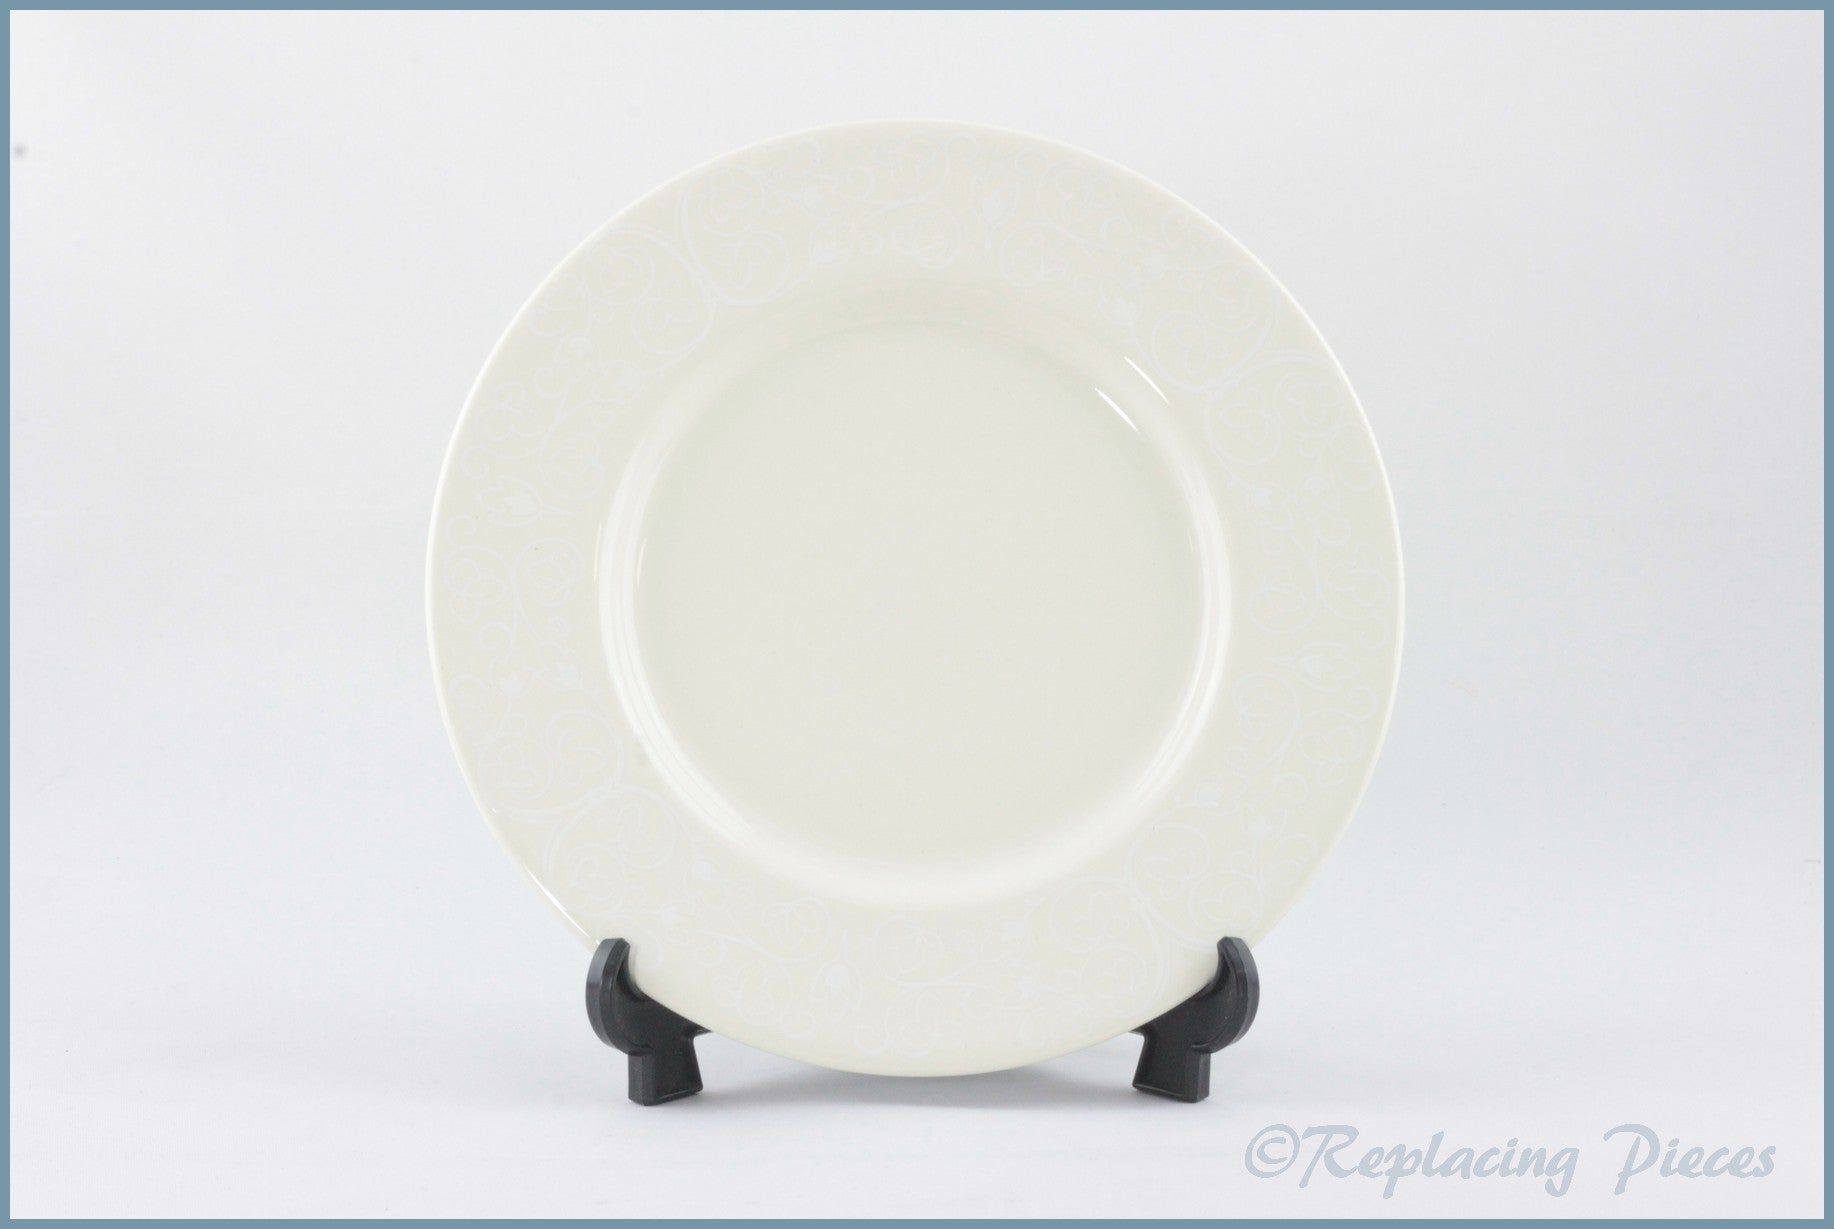 Marks & Spencer - Italian Collection - 6 3/4" Side Plate